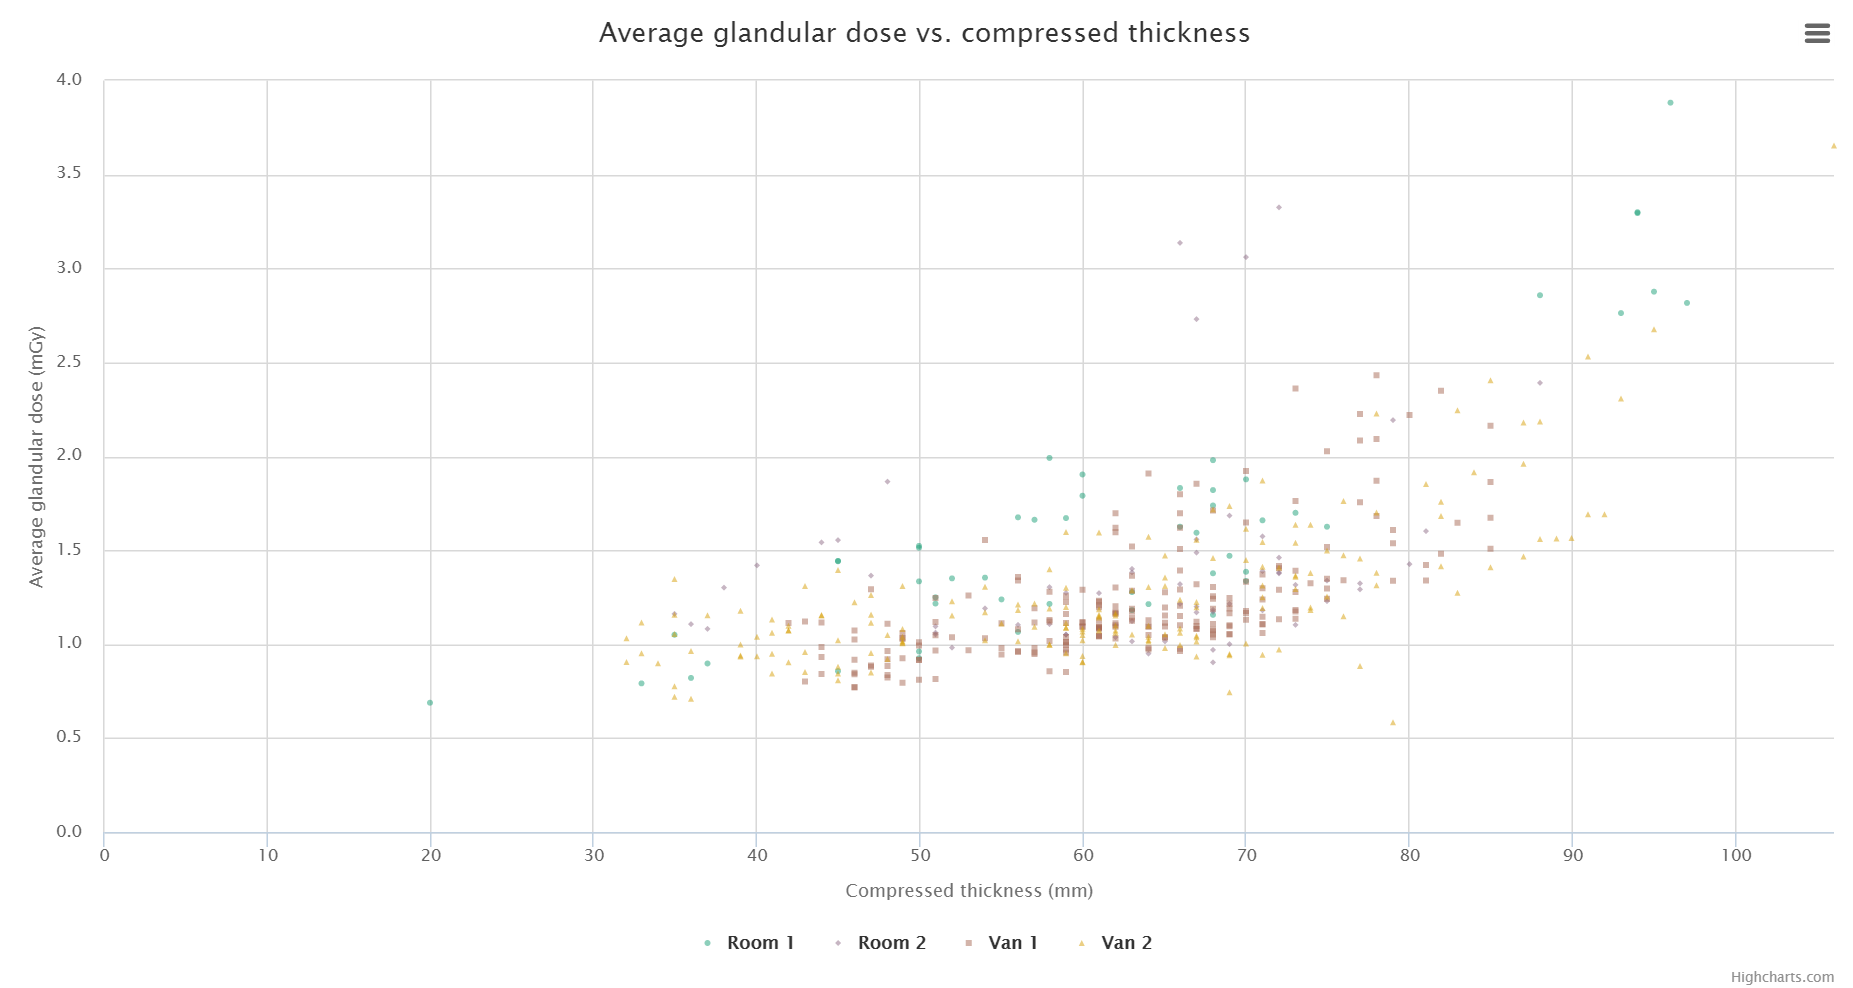 Scatter plot of average glandular dose vs. compressed thickness; one series per system